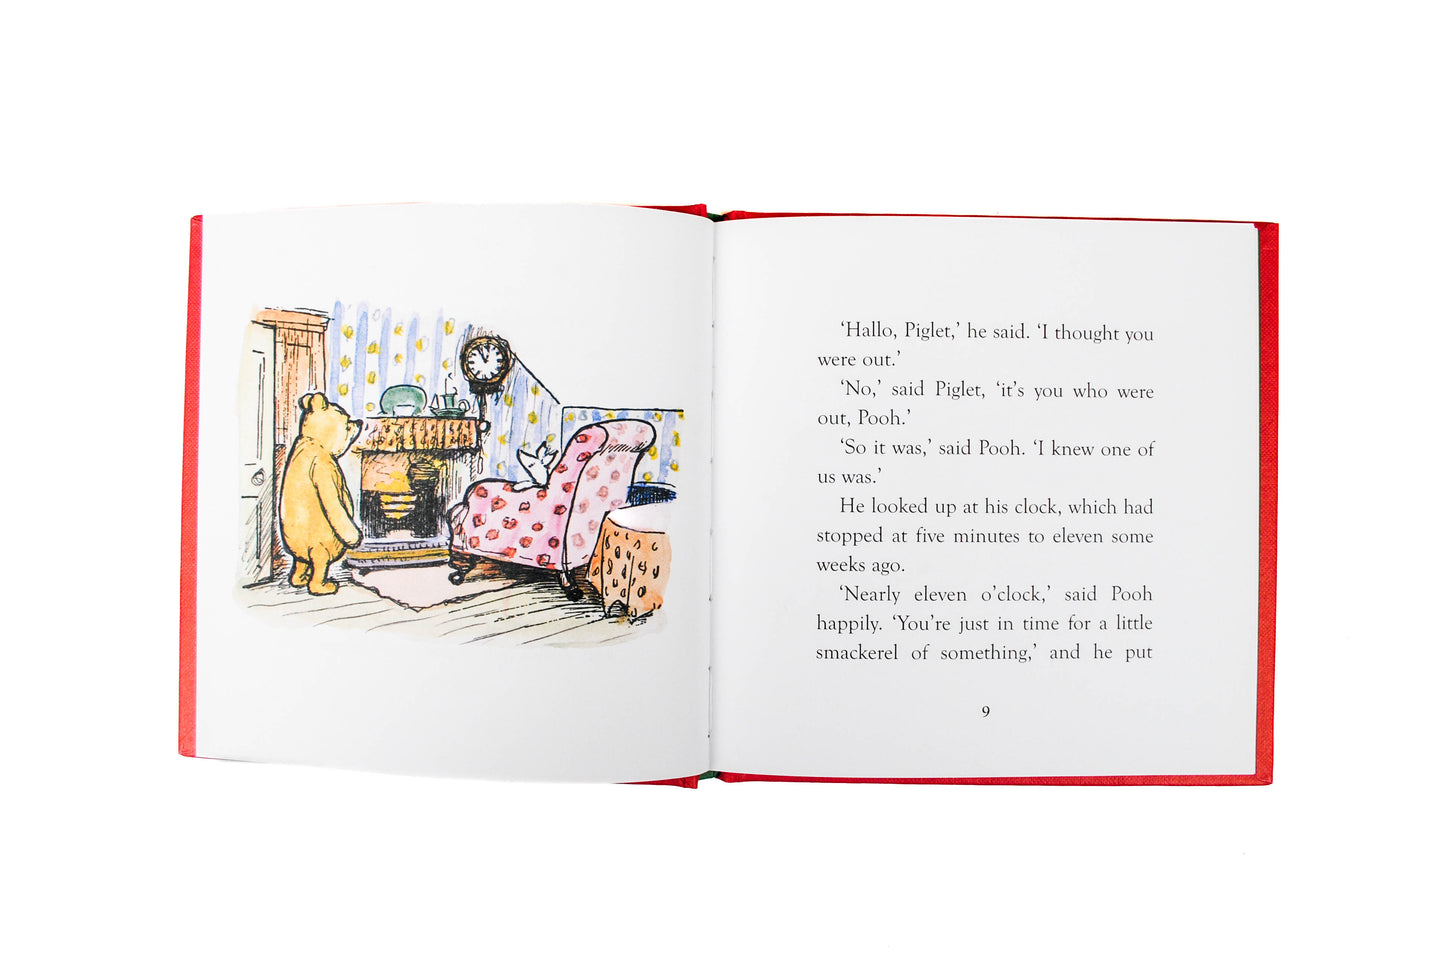 Winnie-the-Pooh: A House is Built for Eeyore: Special Gift Edition of the Original Illustrated Story by A.A.Milne